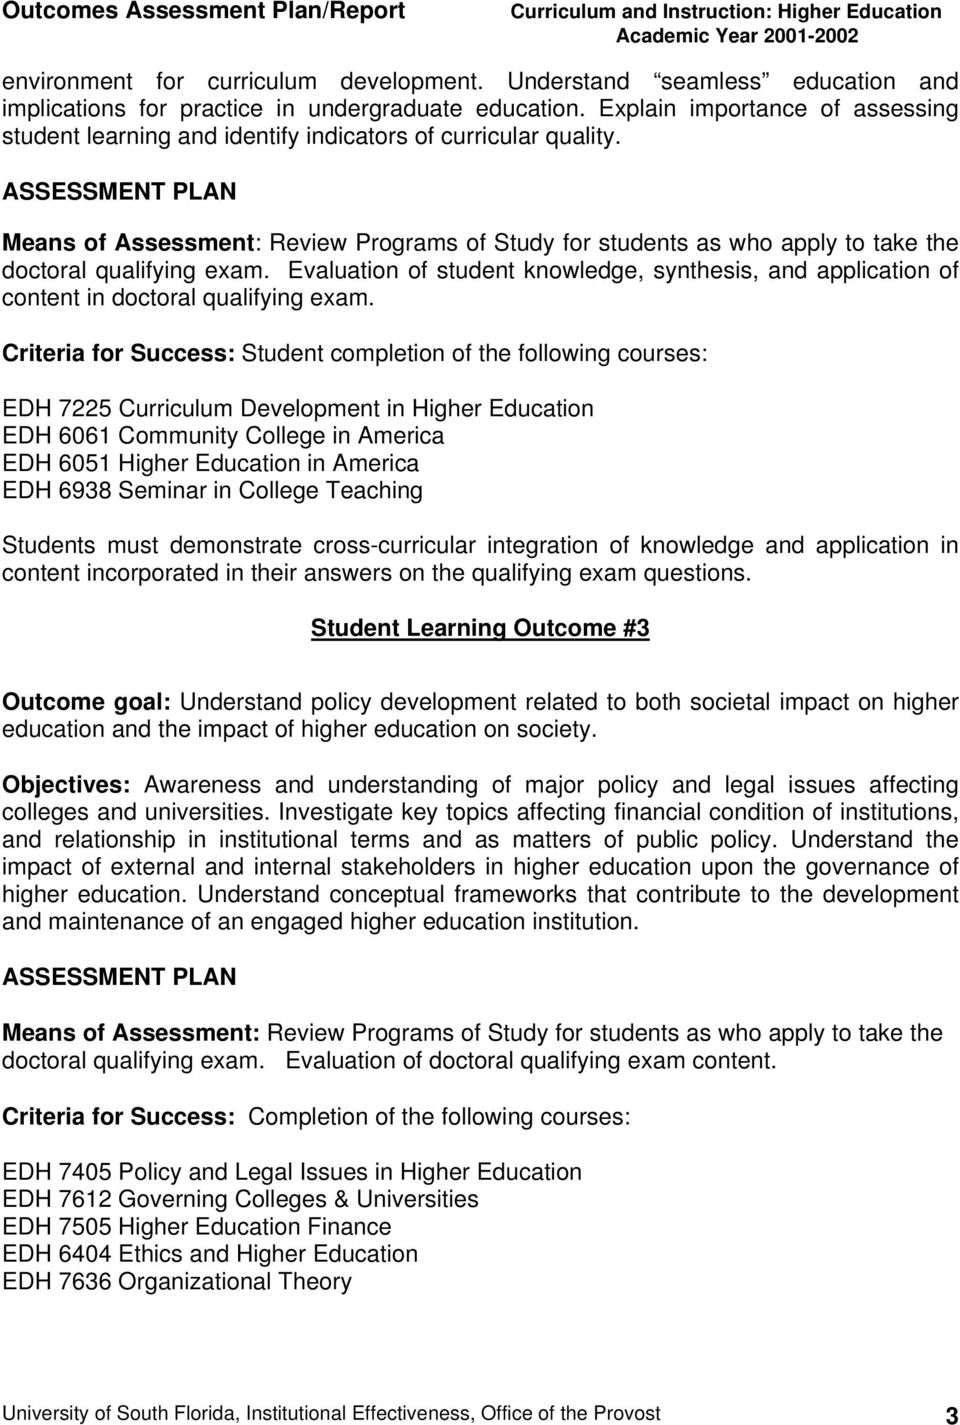 ASSESSMENT PLAN Means of Assessment: Review Programs of Study for students as who apply to take the doctoral qualifying exam.